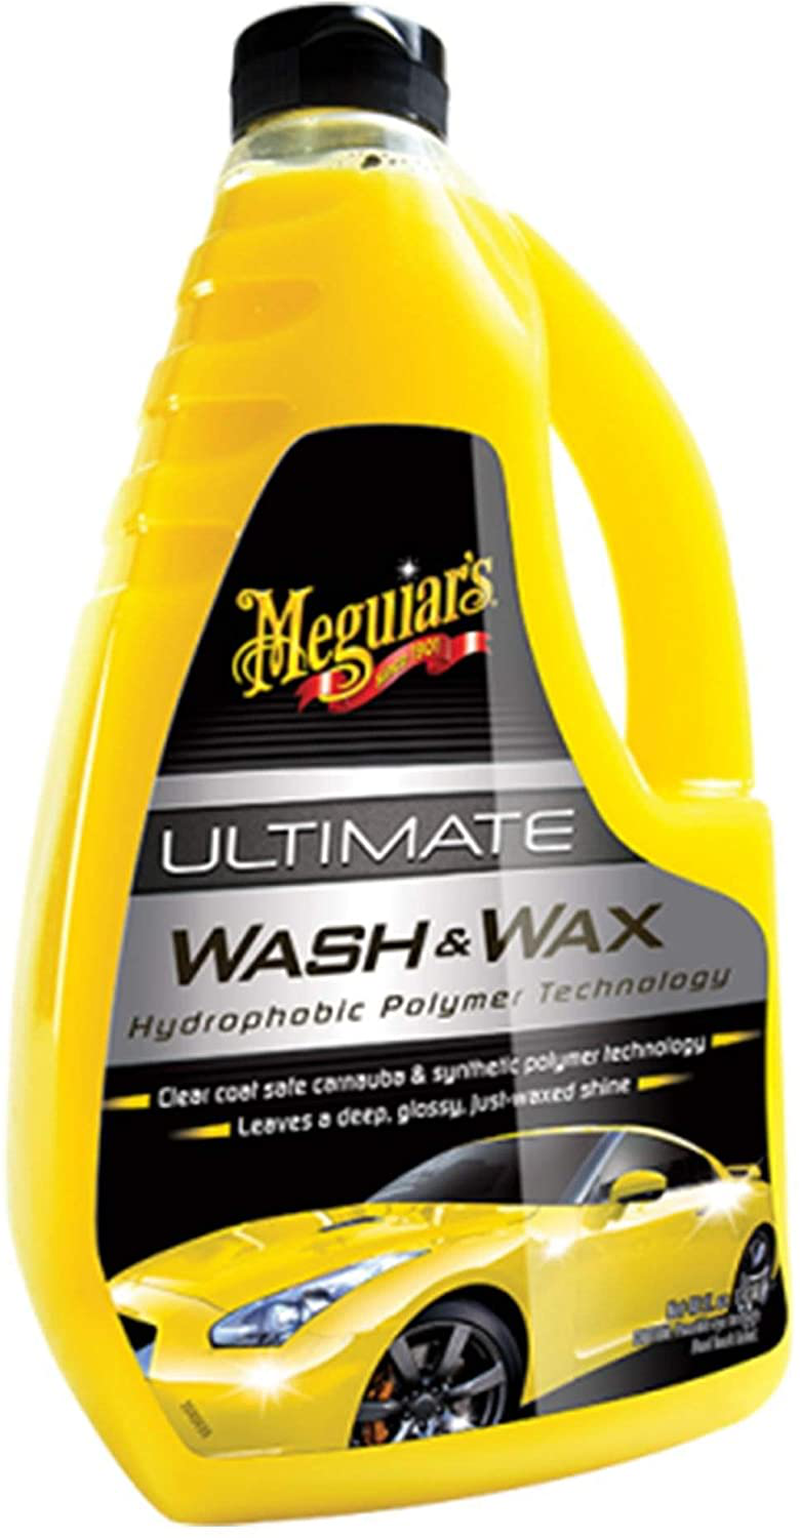 Meguiar's Ultimate Wash & Wax Car Care Cleaning Kit Solution, 48 Ounces (2 Pack)